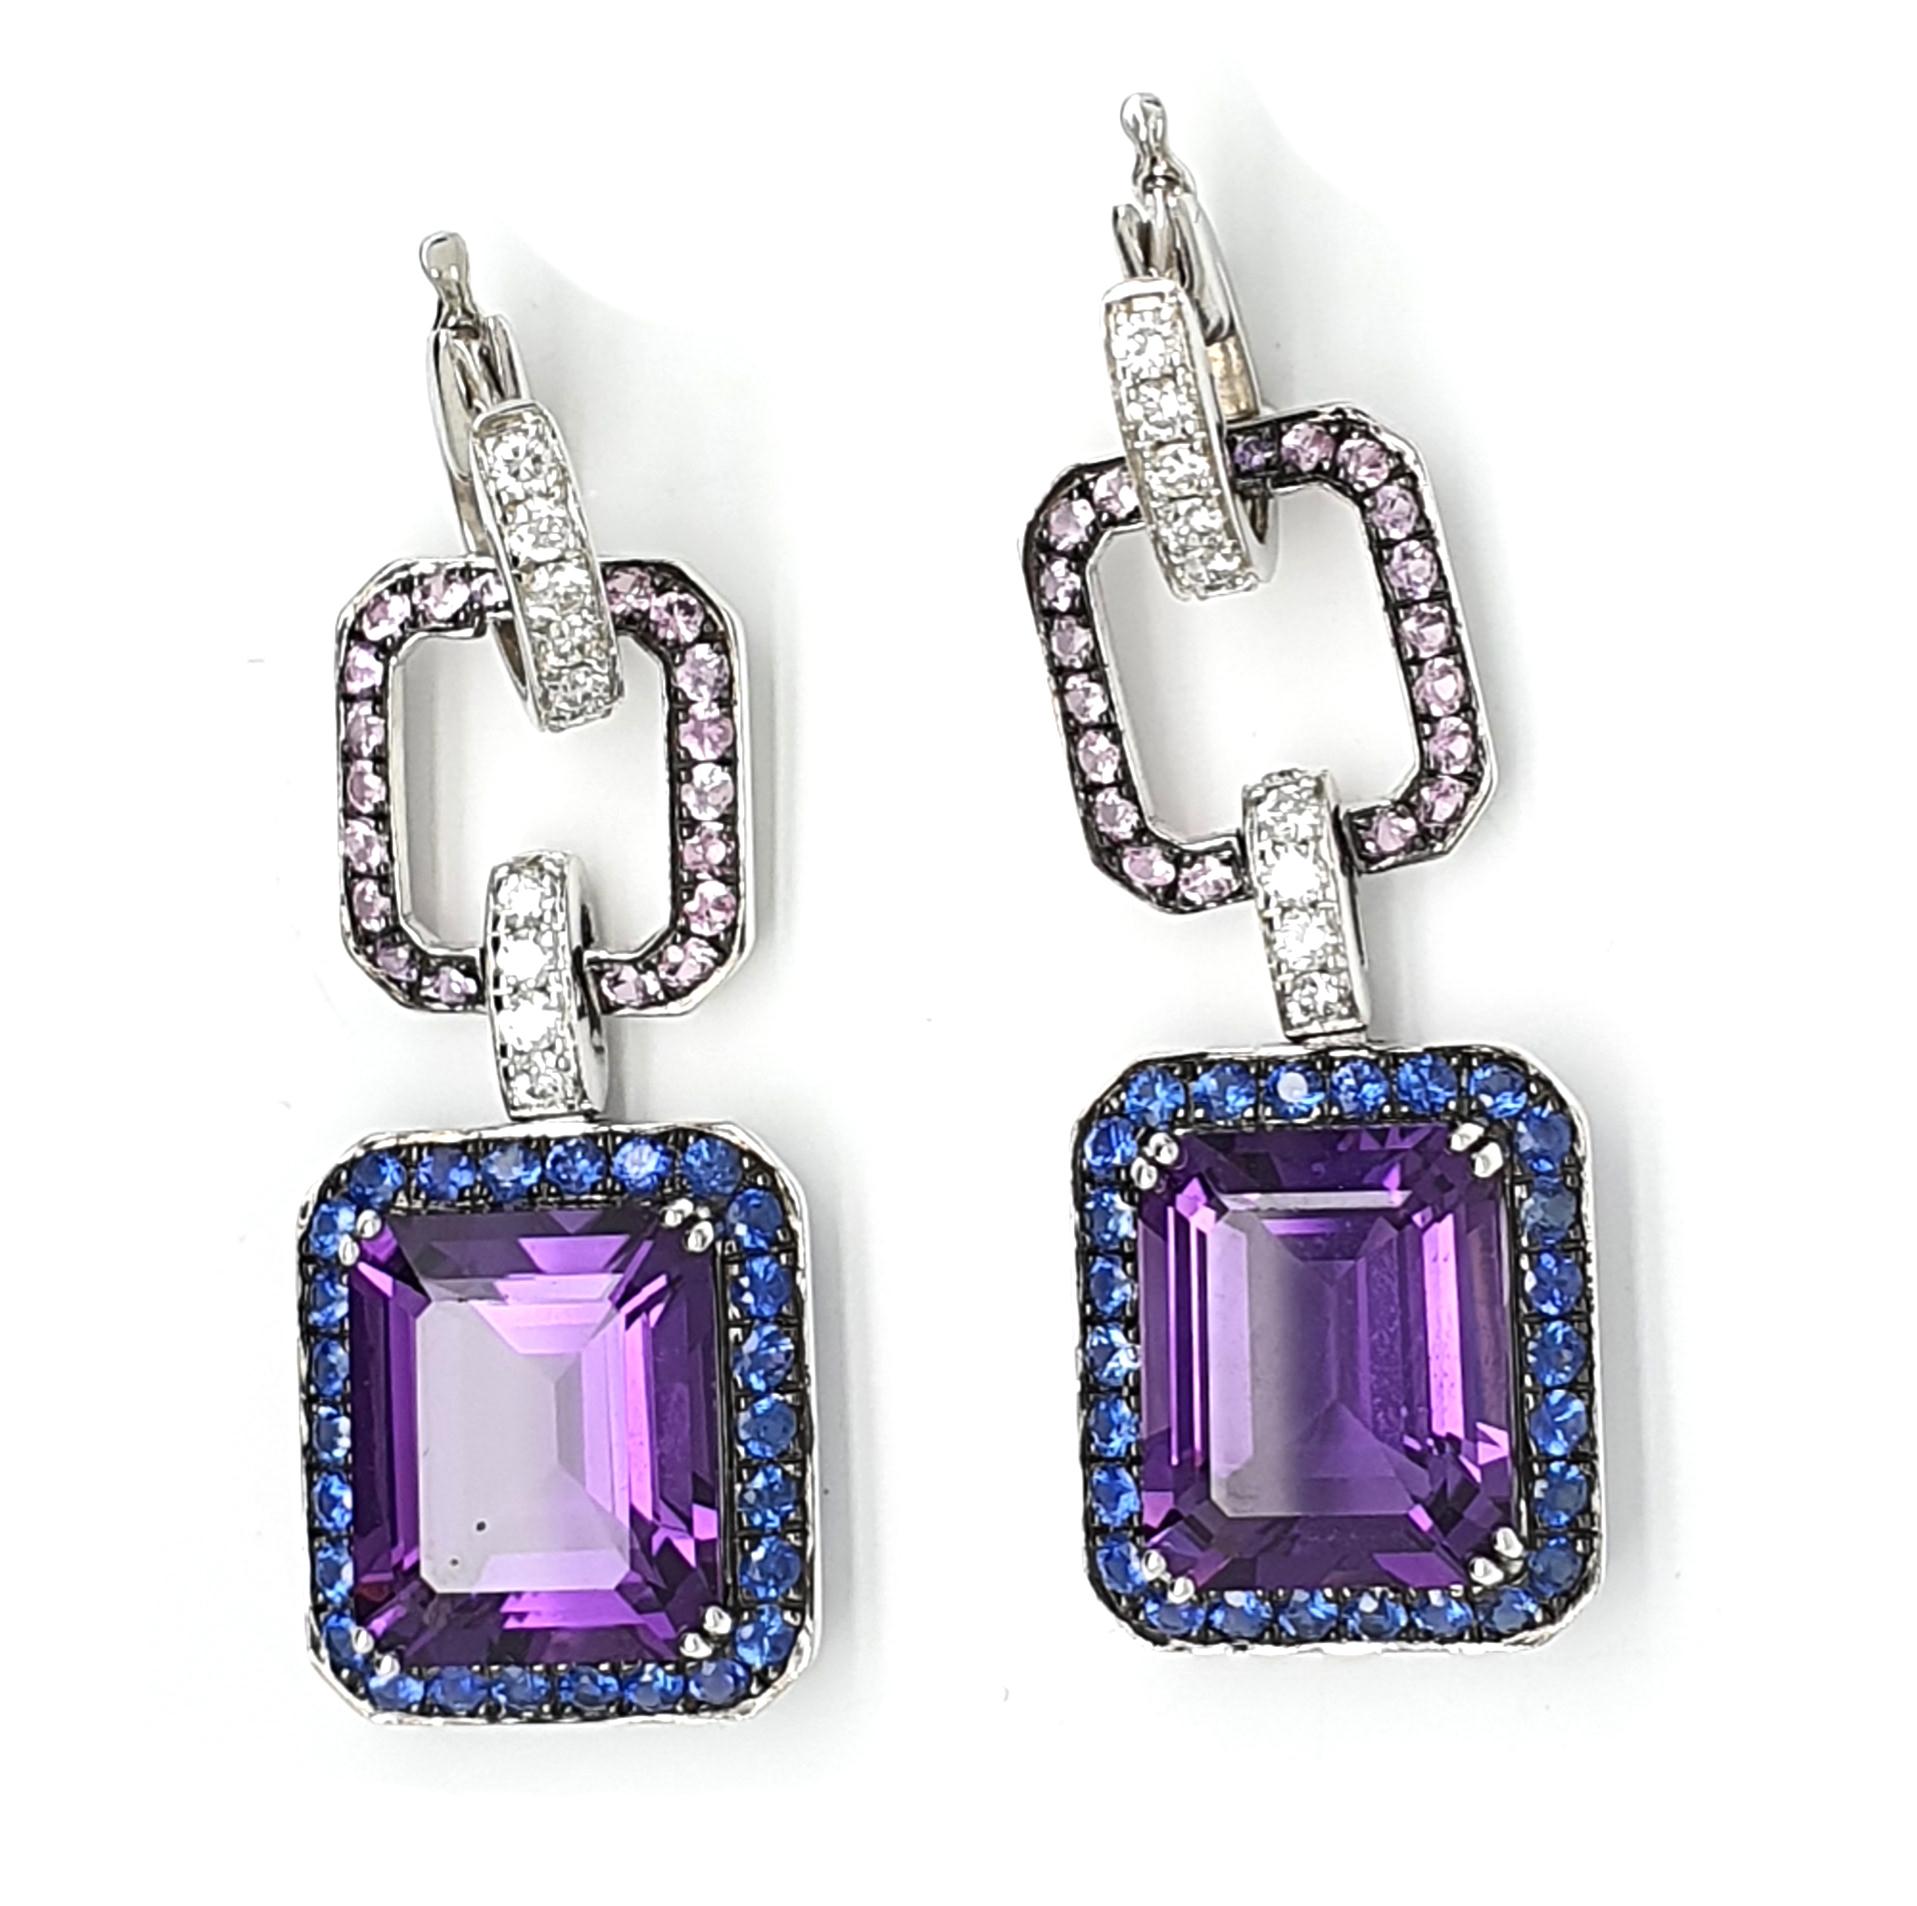 A pair of 18Krt white gold earrings (pendant) occupied with 9.77ct Amethyst, 8-angular sharpened with		
entourage of blue-lilac Corunds, 1.38ct, occupied with pink Corunds 0.74ct and brilliant cut	
diamonds 0.53ct W/VVSi	